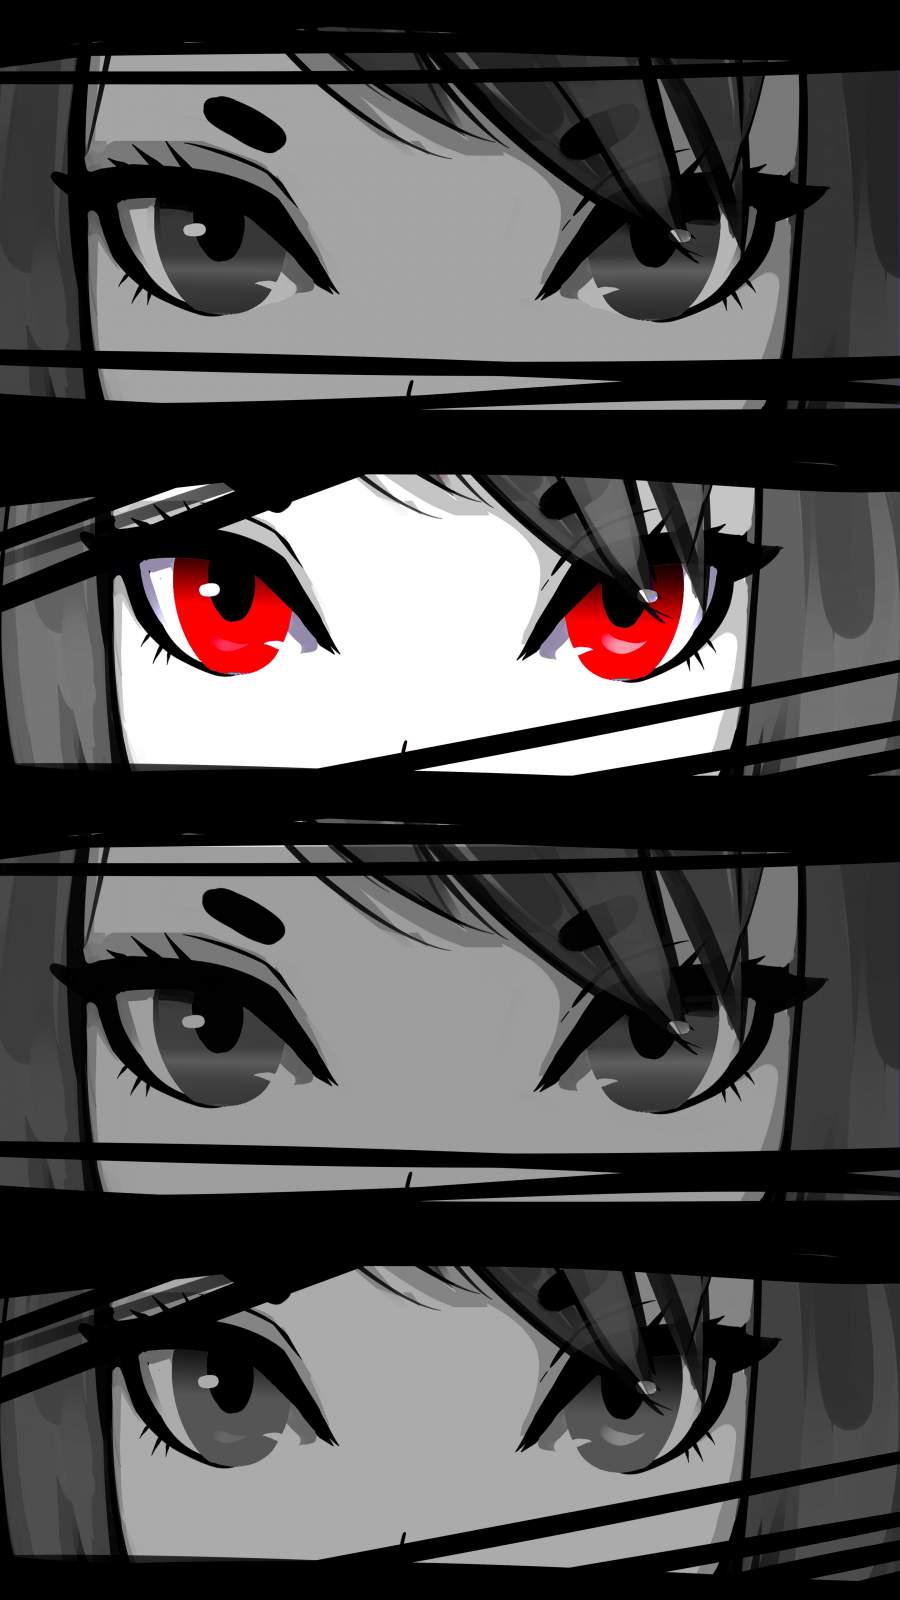 Anime Girl Eyes - IPhone Wallpapers : iPhone Wallpapers